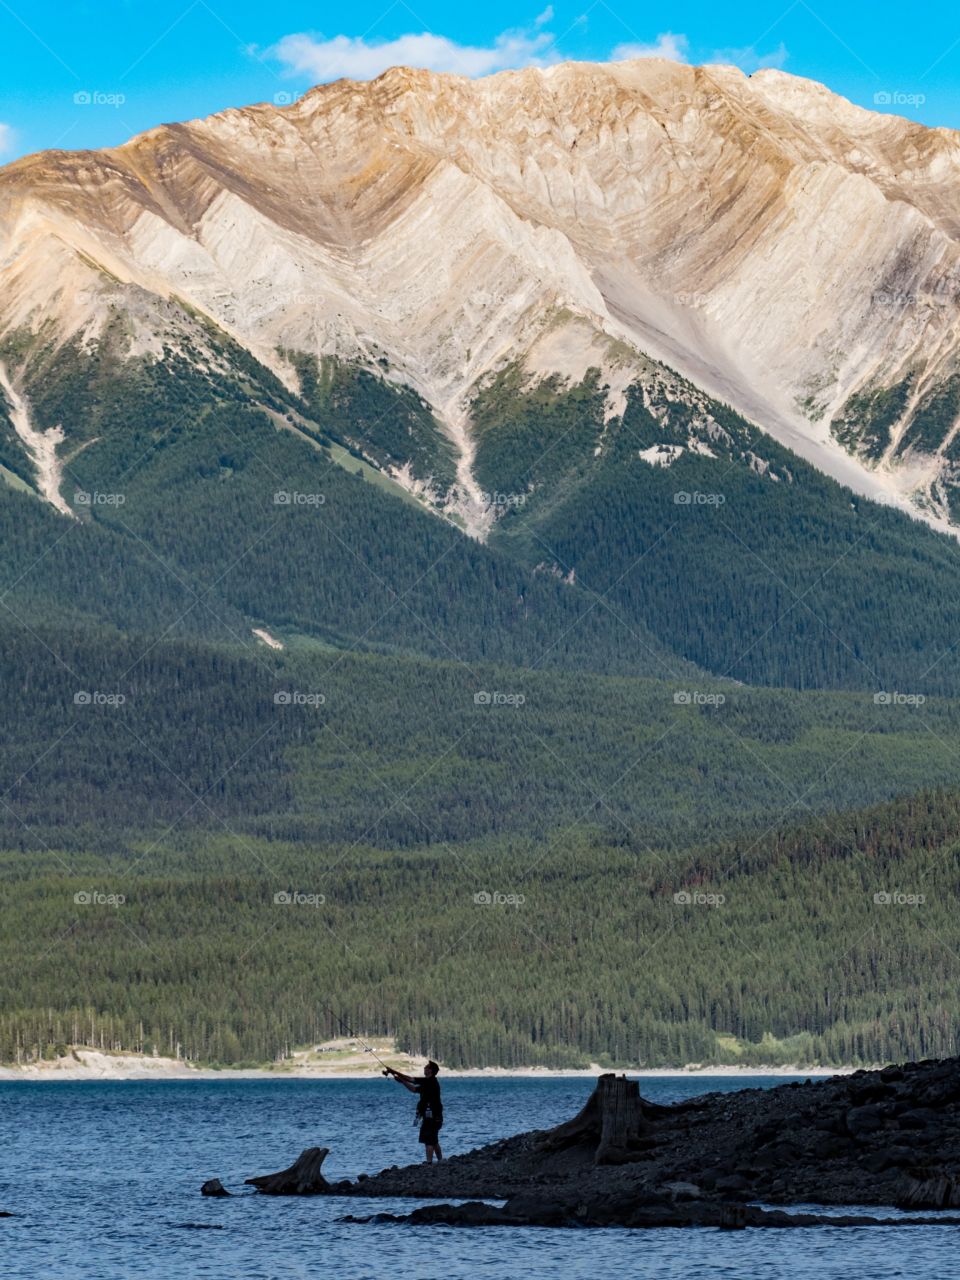 Fisherman Casting into a Blue Lake, with a Mountain Background, in Kananaskis.